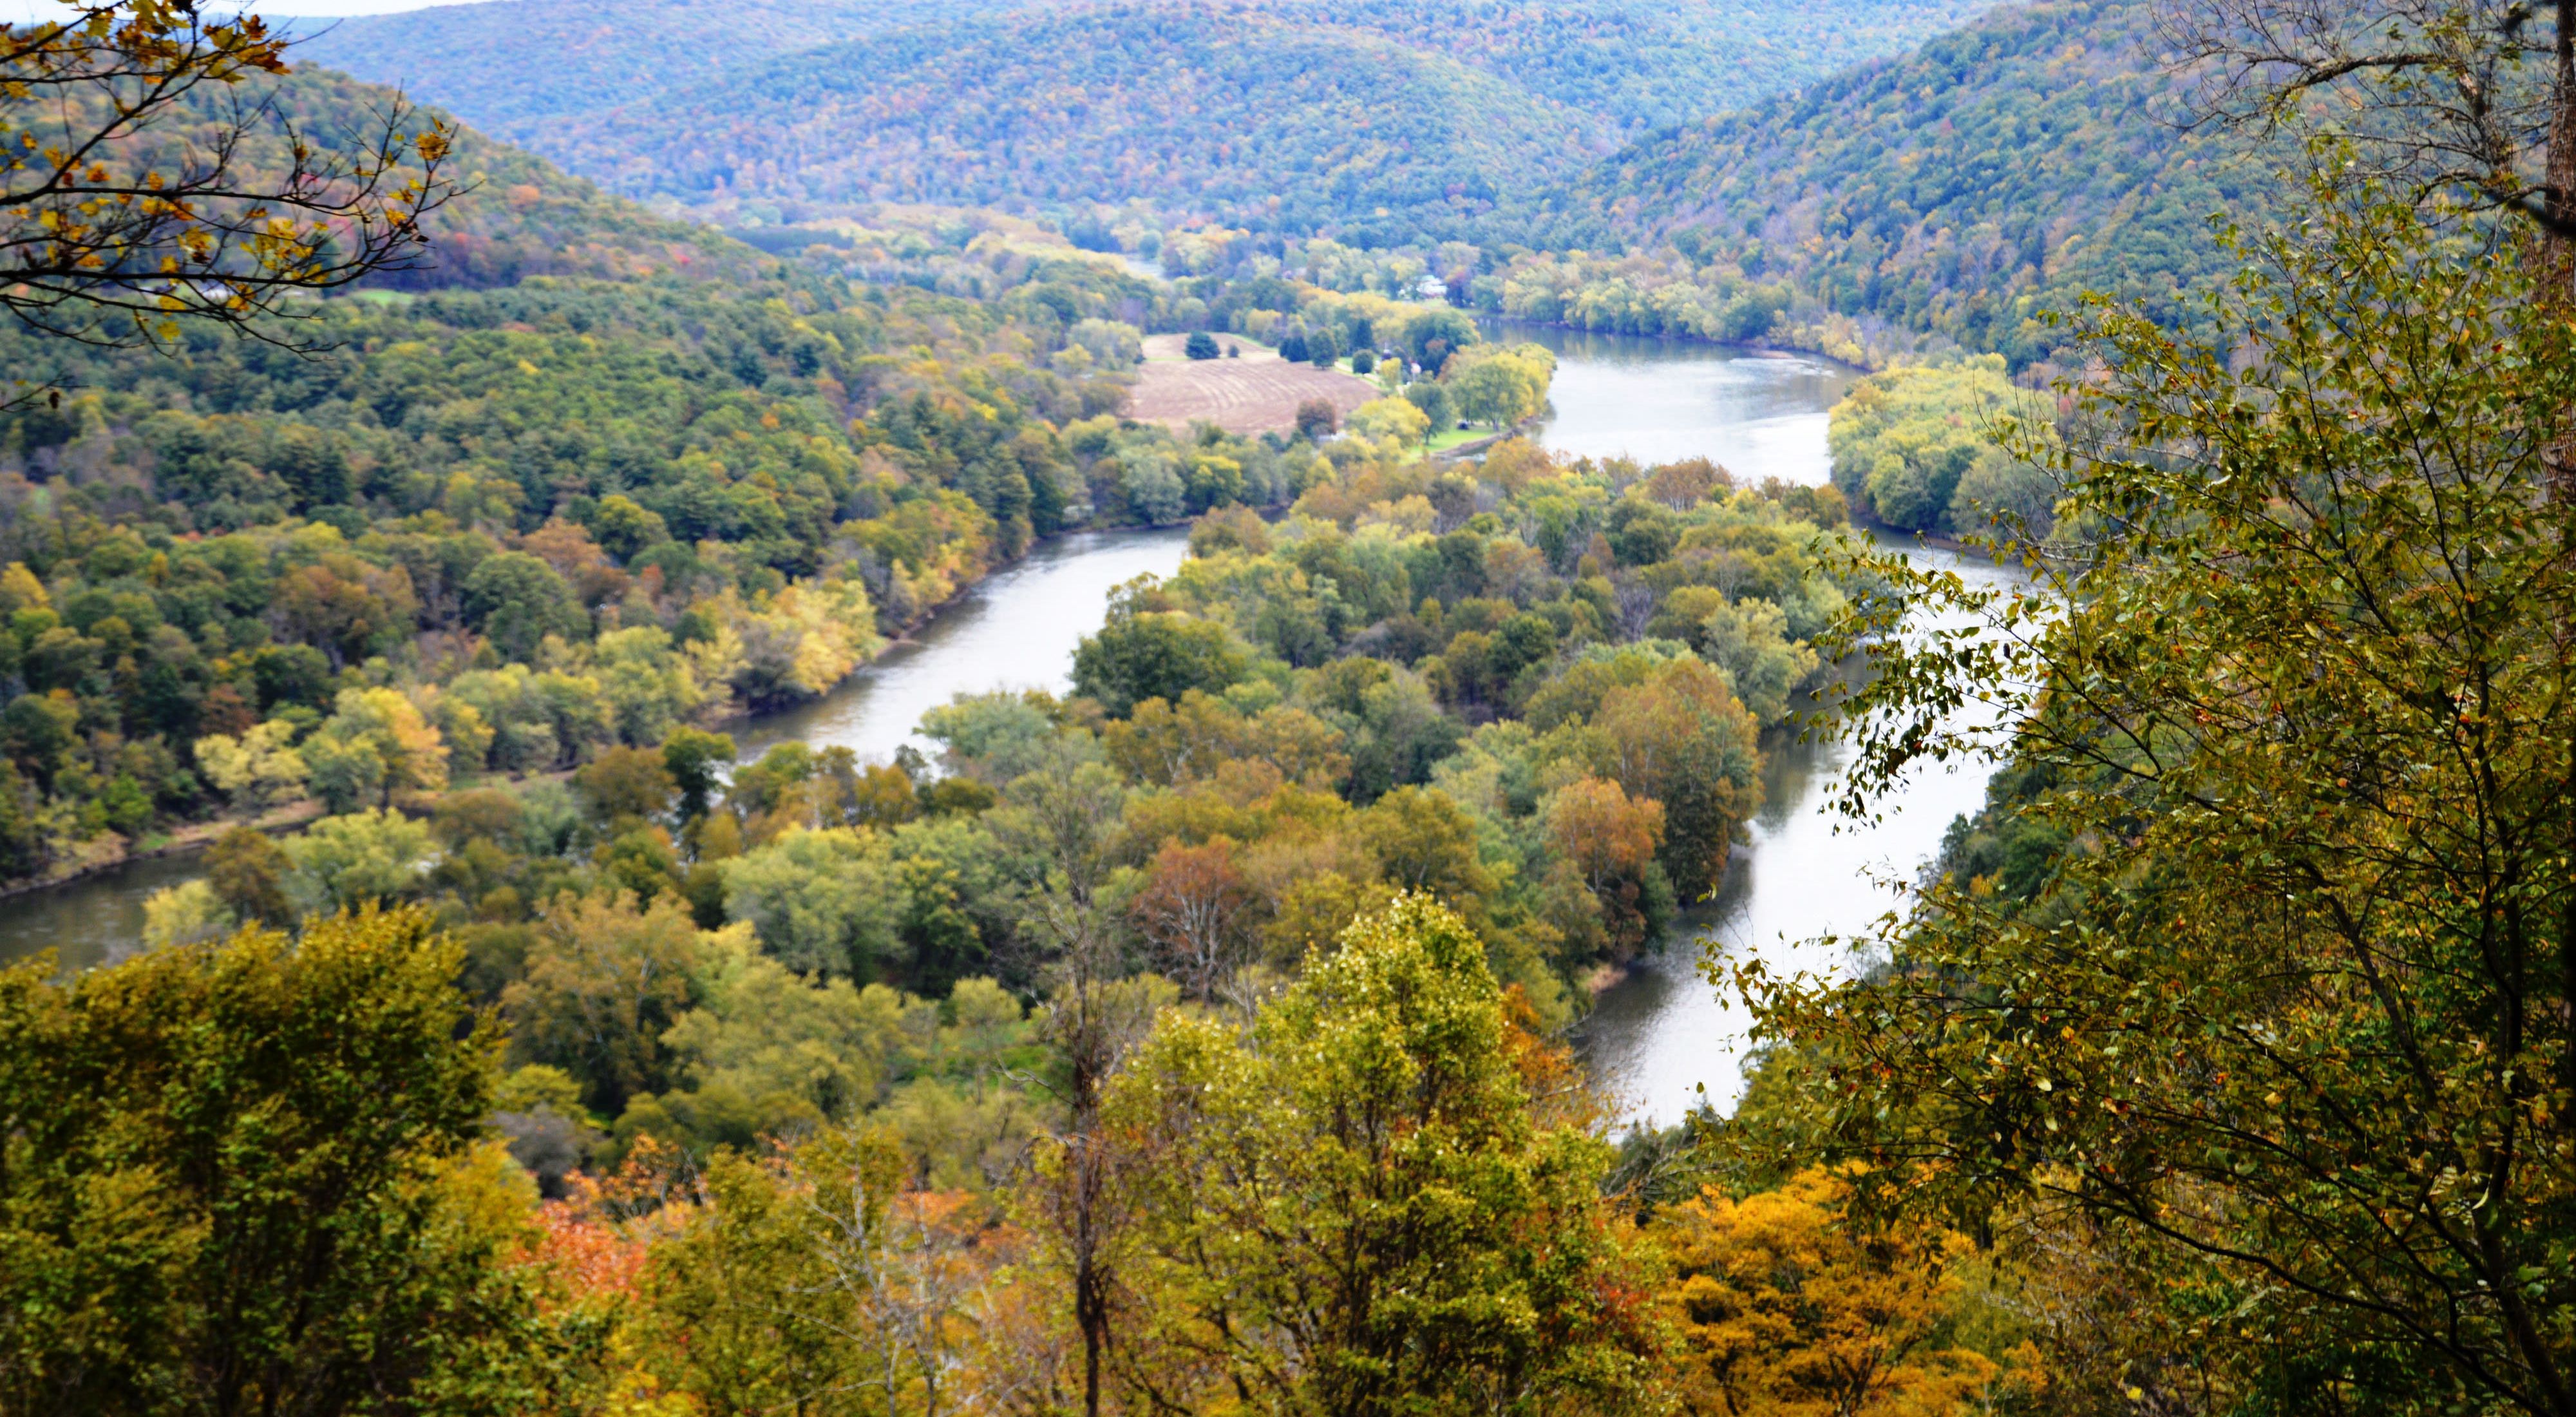 A river forks around a short tree-covered isthmus before rejoining and curving to the left and out of sight. The land is covered with trees in fall foliage, sloping up and away from the river.